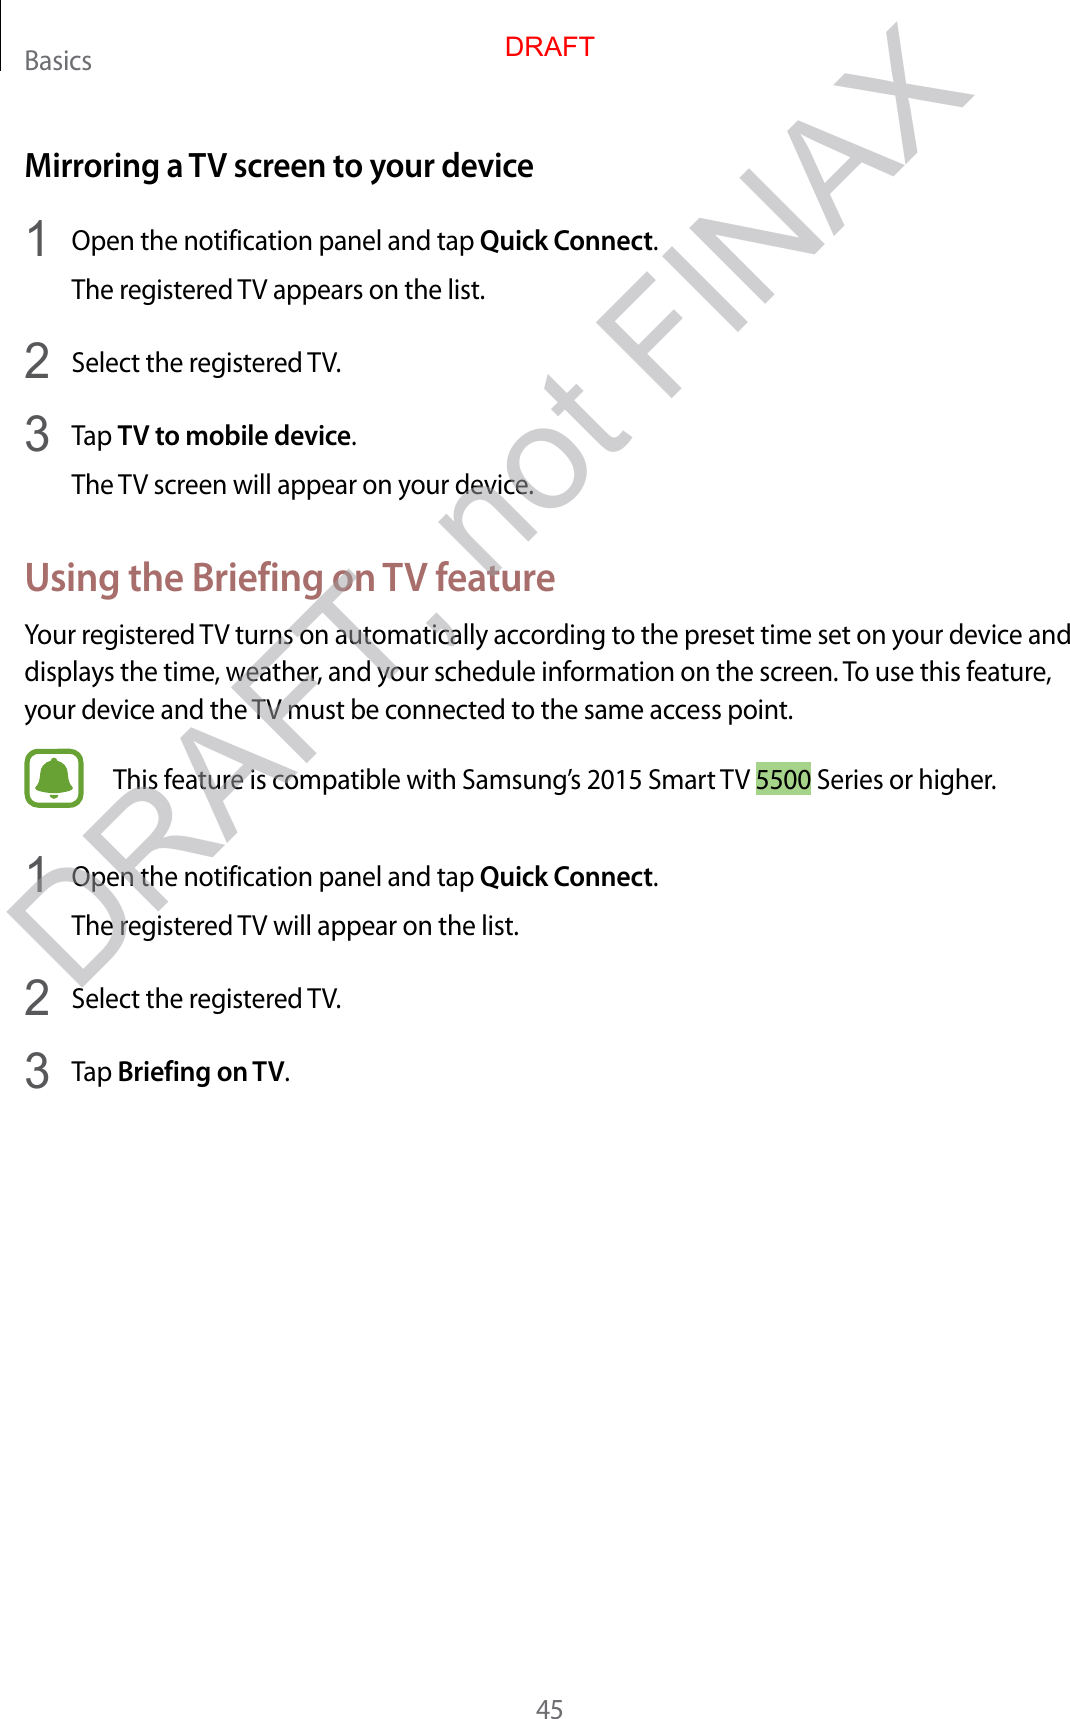 Basics45Mirroring a TV screen to your device1  Open the notification panel and tap Quick Connect.The registered TV appears on the list.2  Select the registered TV.3  Tap TV to mobile device.The TV screen will appear on your device.Using the Briefing on TV featureYour registered TV turns on automatically according to the preset time set on your device and displays the time, weather, and your schedule information on the screen. To use this feature, your device and the TV must be connected to the same access point.This feature is compatible with Samsung’s 2015 Smart TV 5500 Series or higher.1  Open the notification panel and tap Quick Connect.The registered TV will appear on the list.2  Select the registered TV.3  Tap Briefing on TV.DRAFTDRAFT, not FINAX